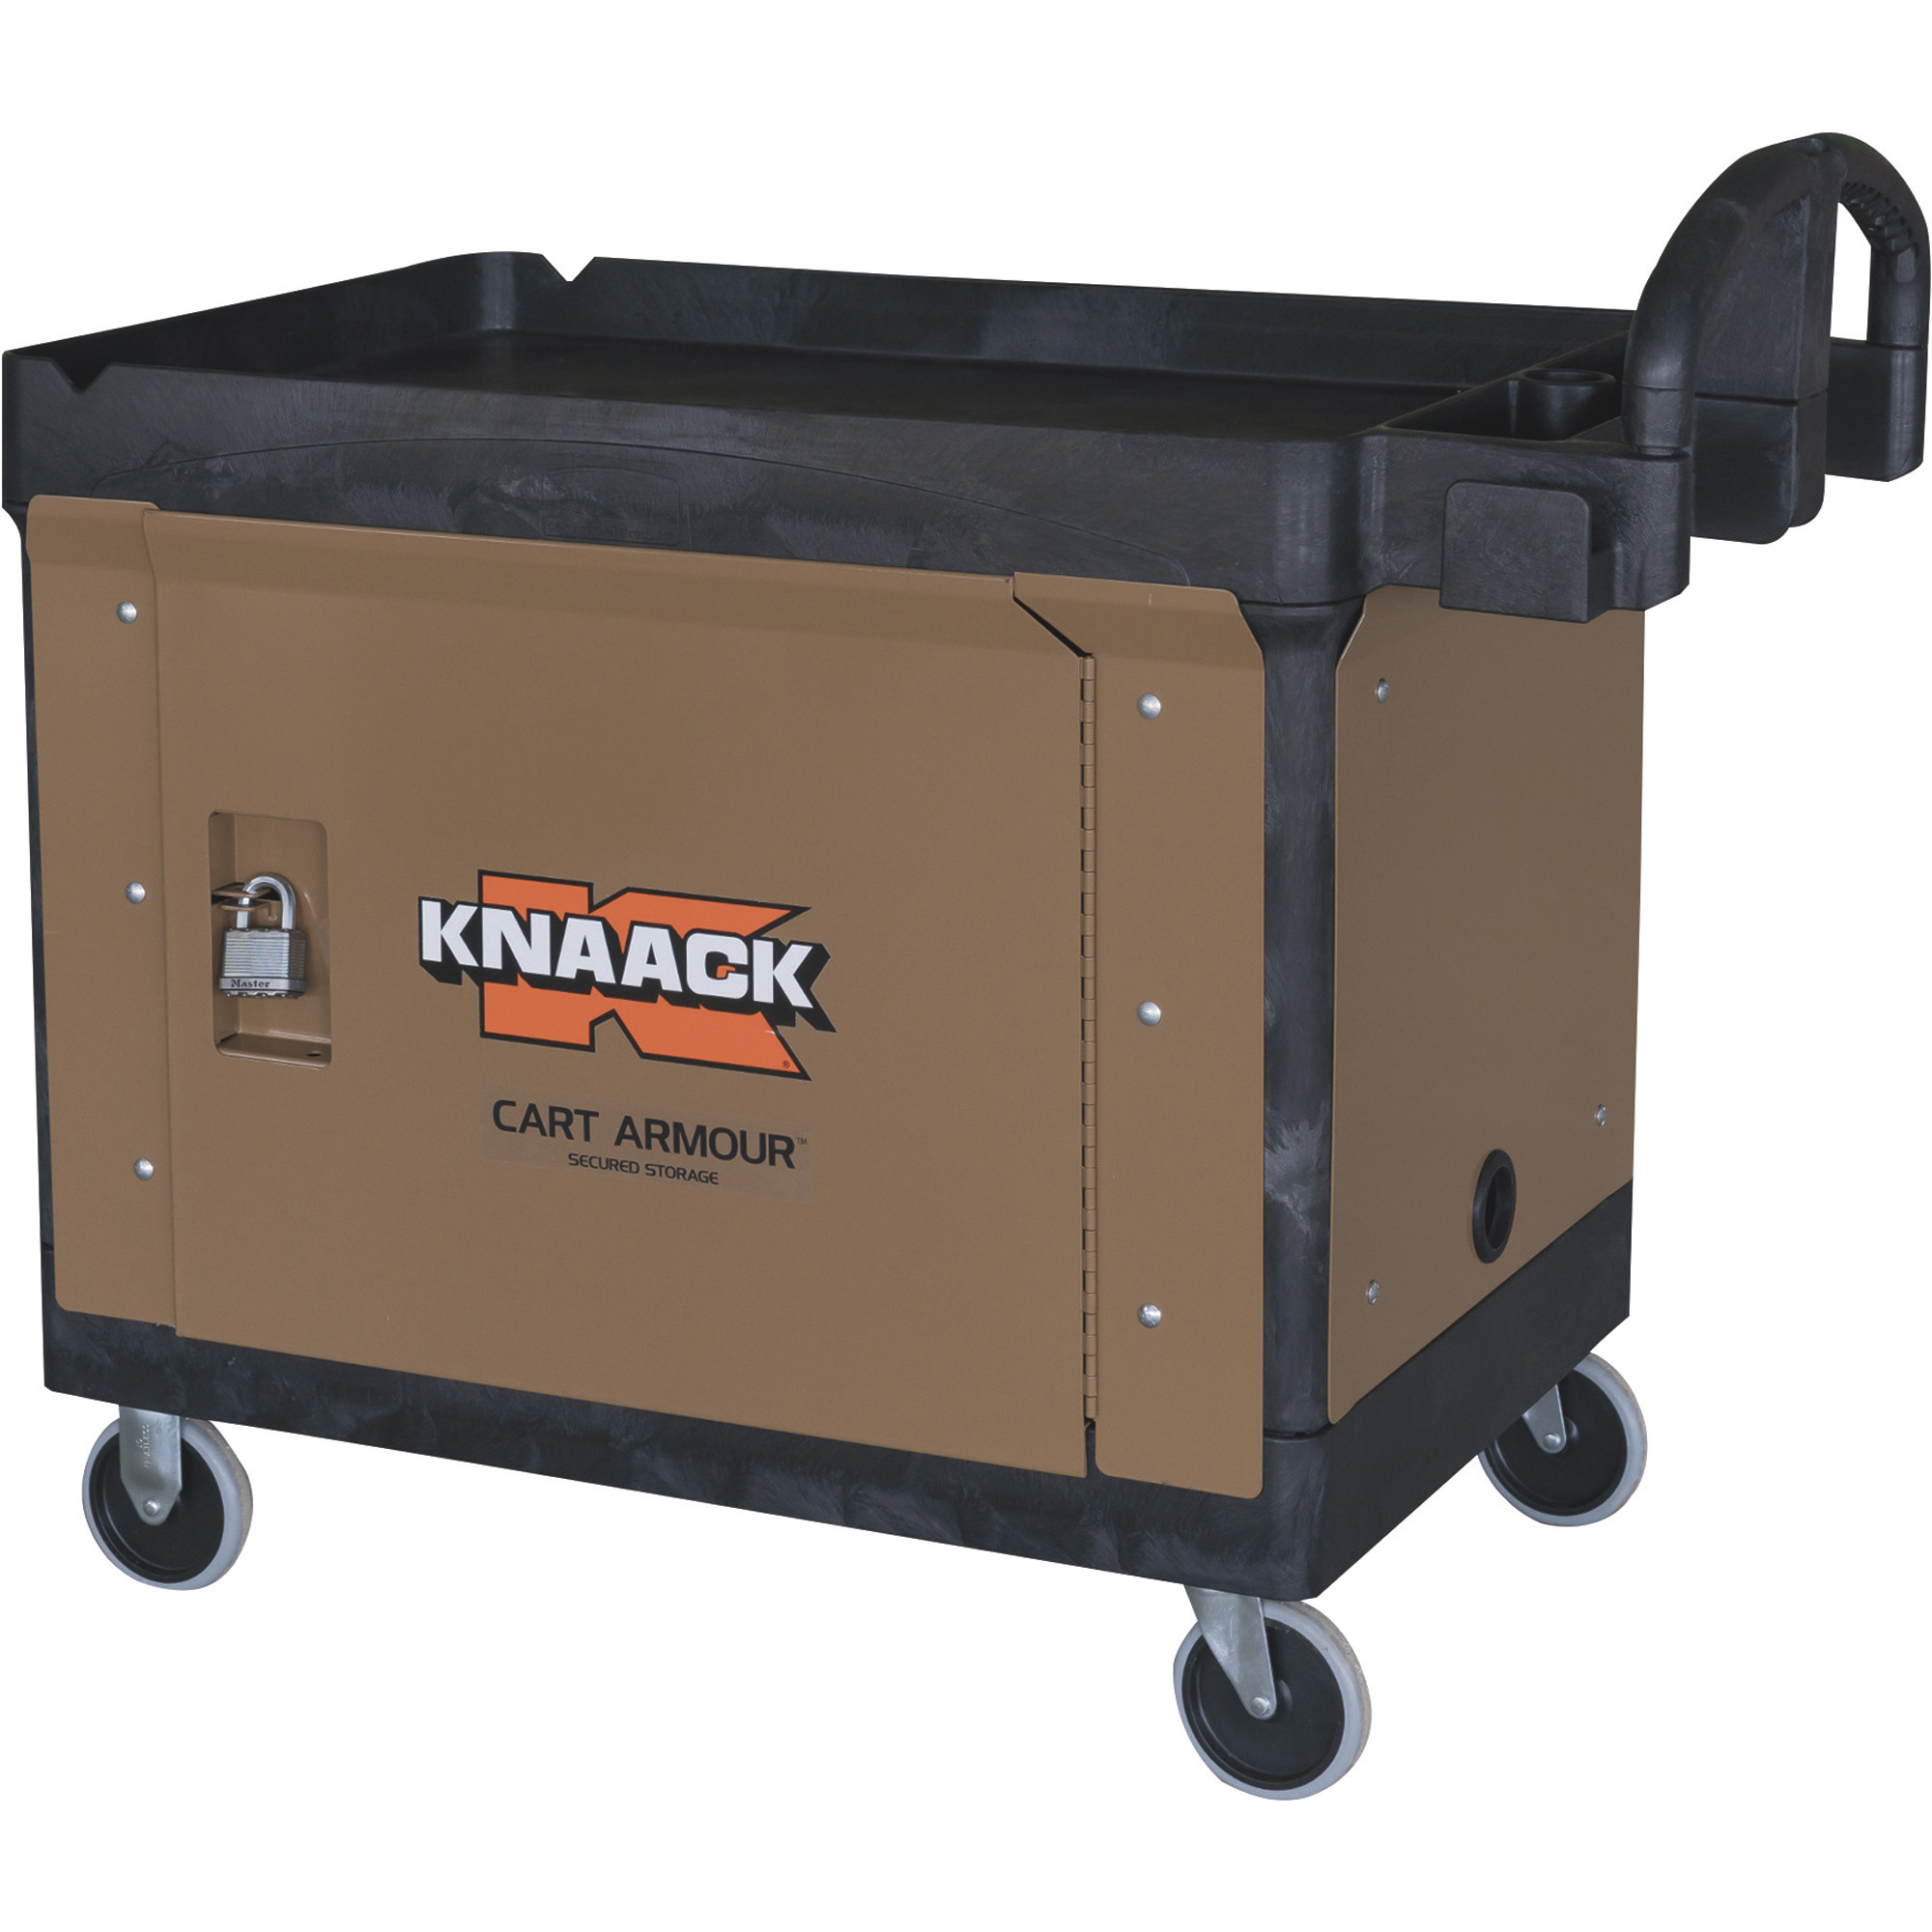 KNAACK Cart Armour Mobile Cart Security Paneling, Fits Rubbermaid Cart 4520-88, Model CA-01